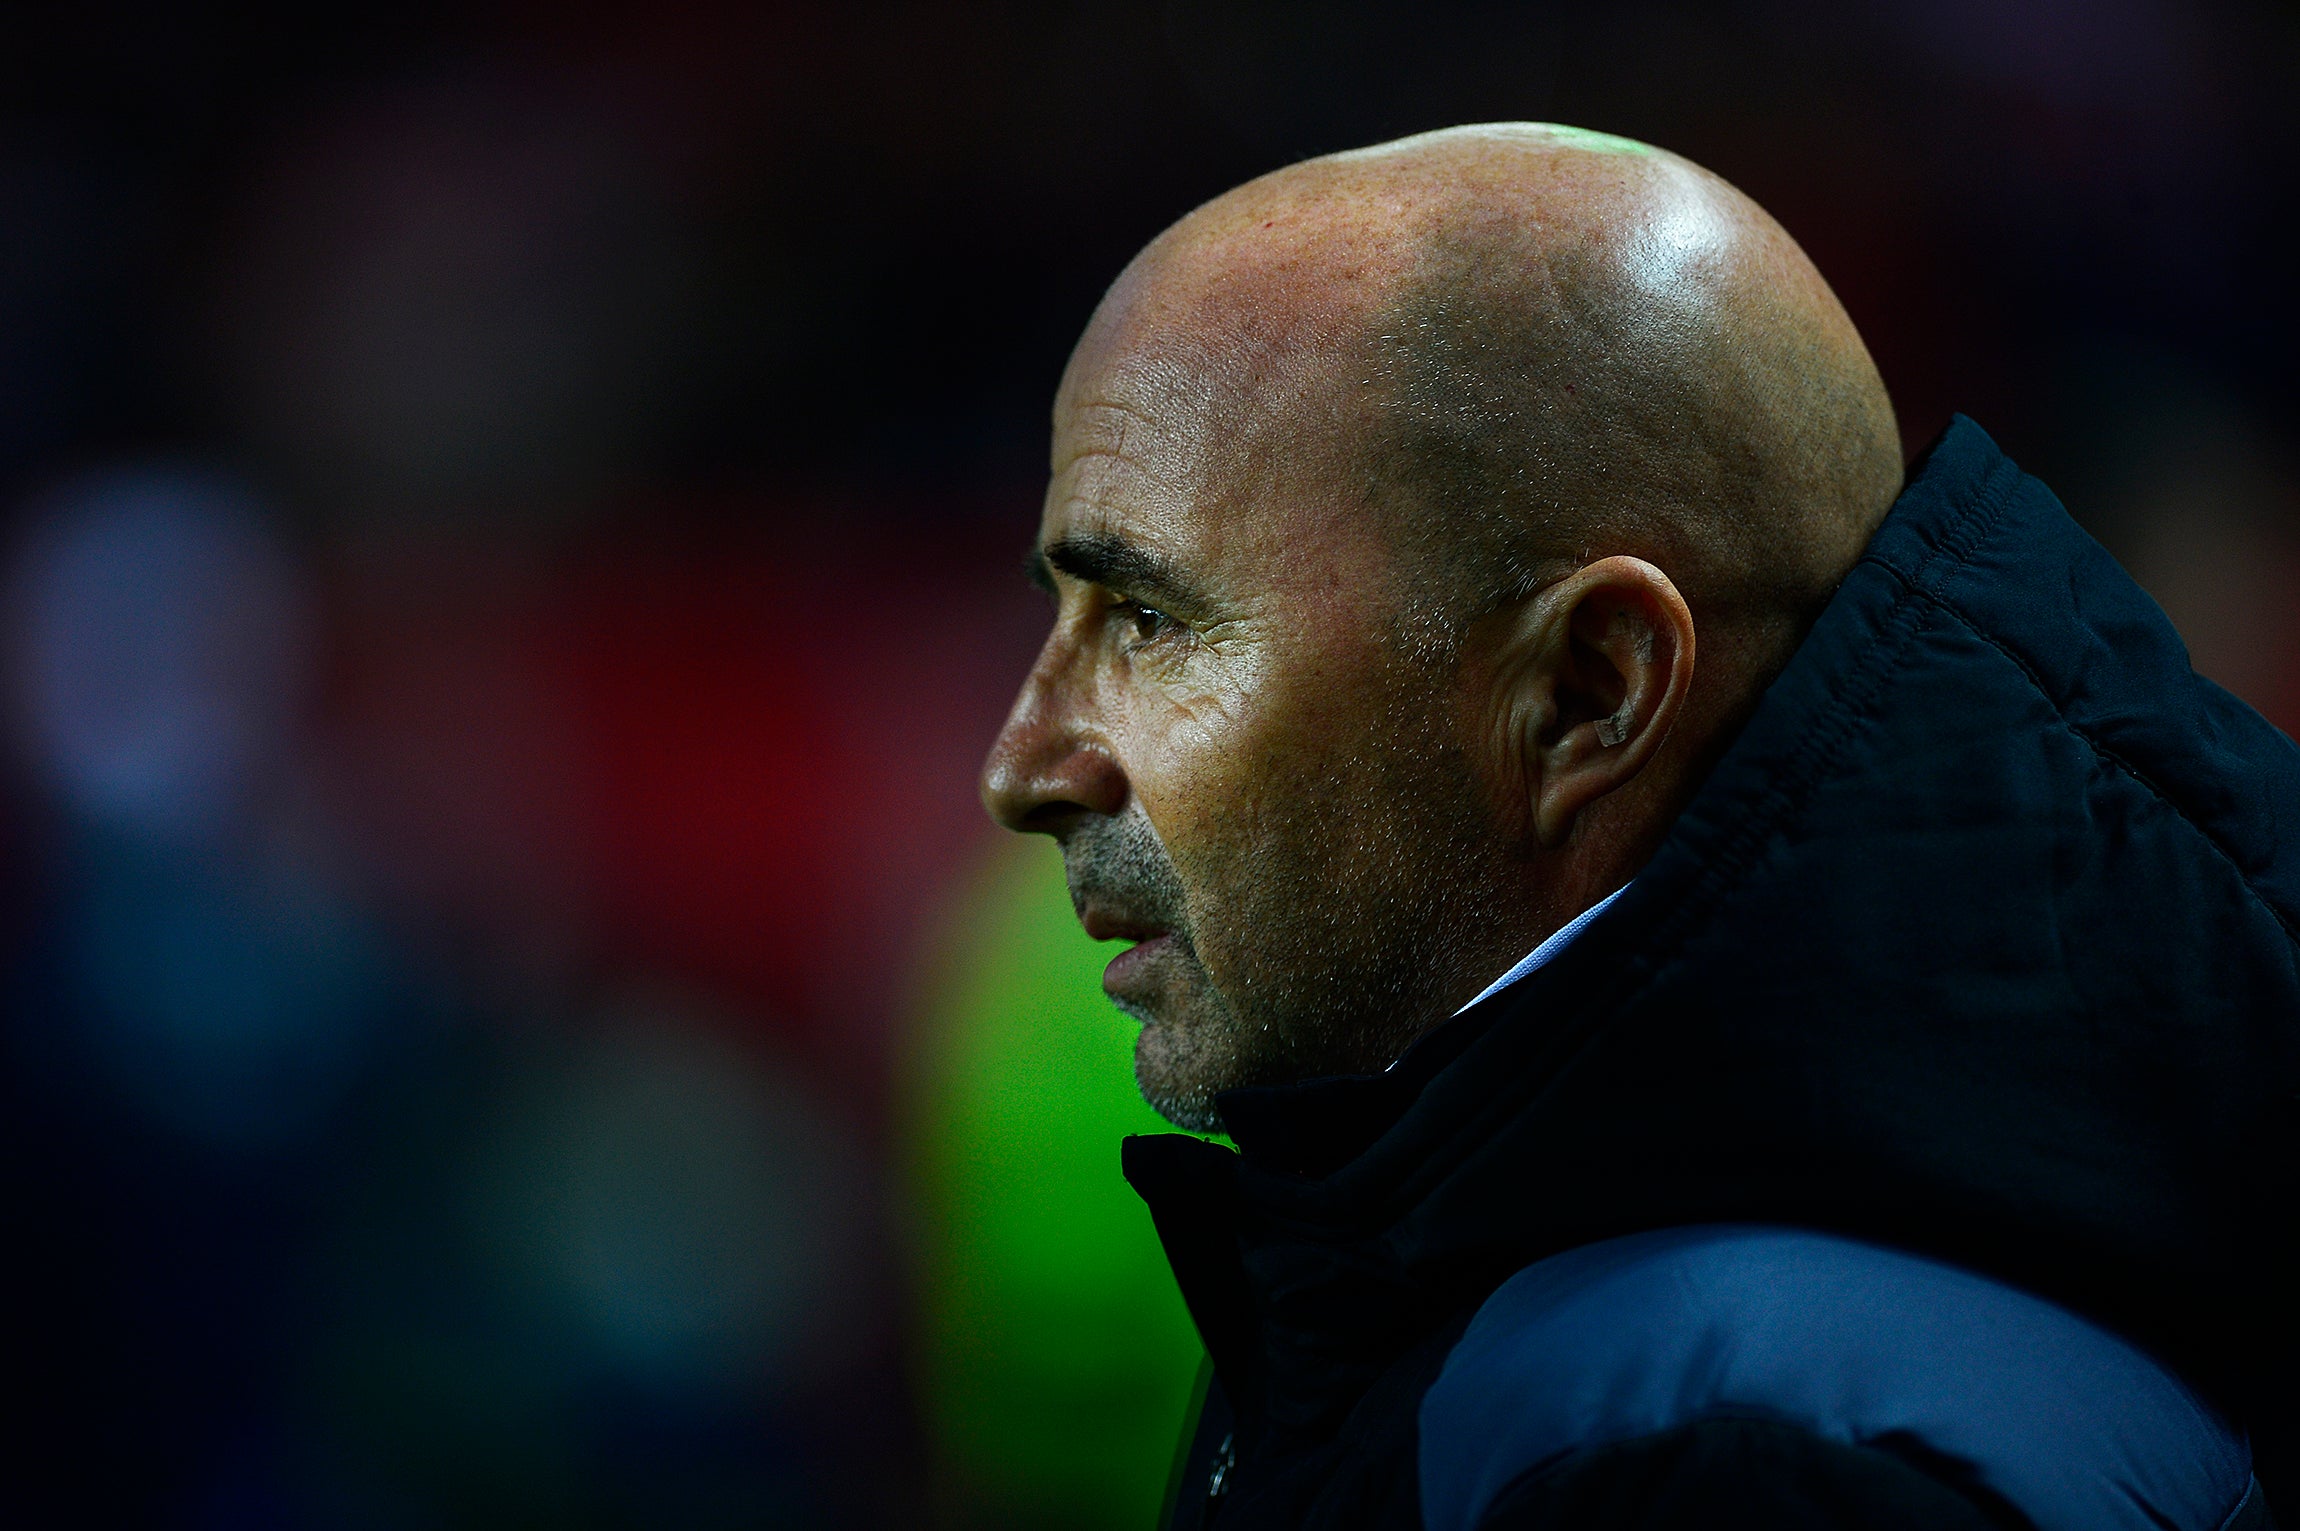 Sampaoli has much to ponder ahead of a must-win game in Buenos Aires